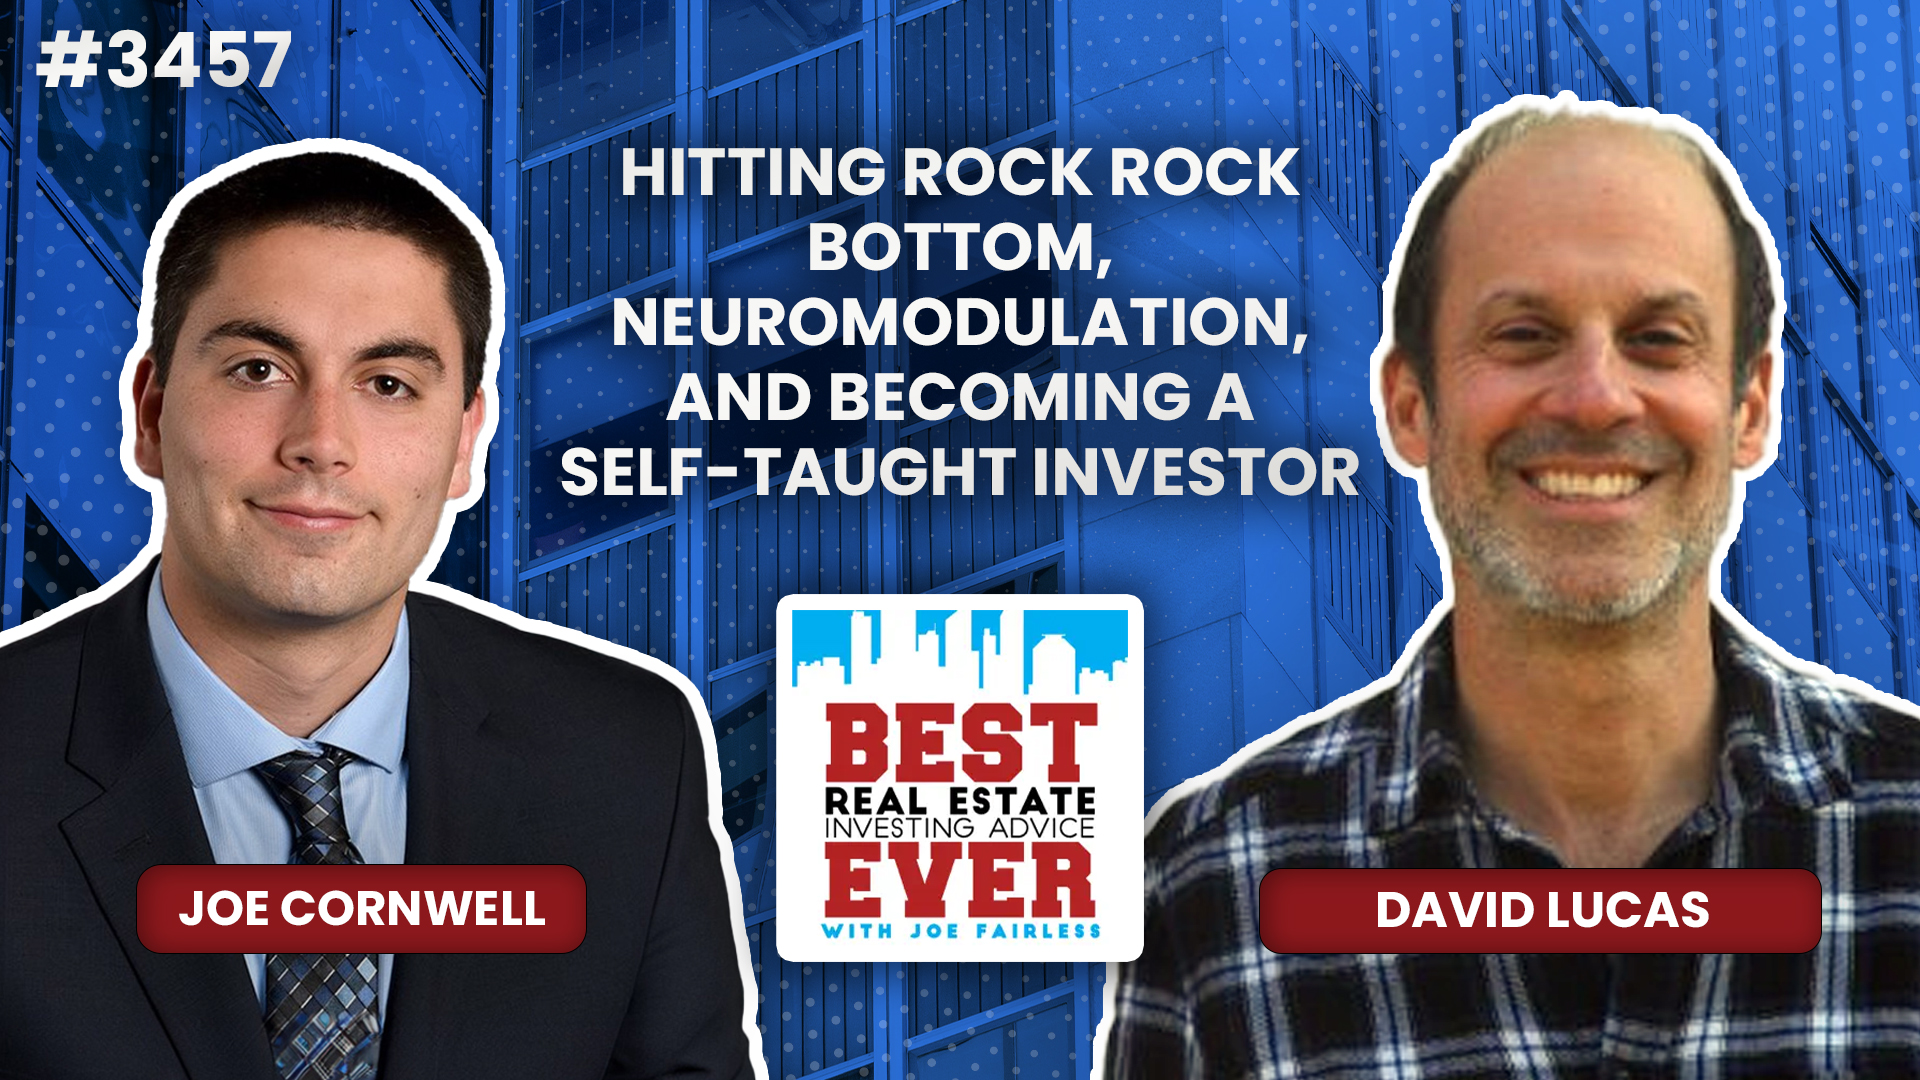 JF3457: Hitting Rock Bottom, Neuromodulation, and Becoming a Self-Taught Investor ft. David Lucas